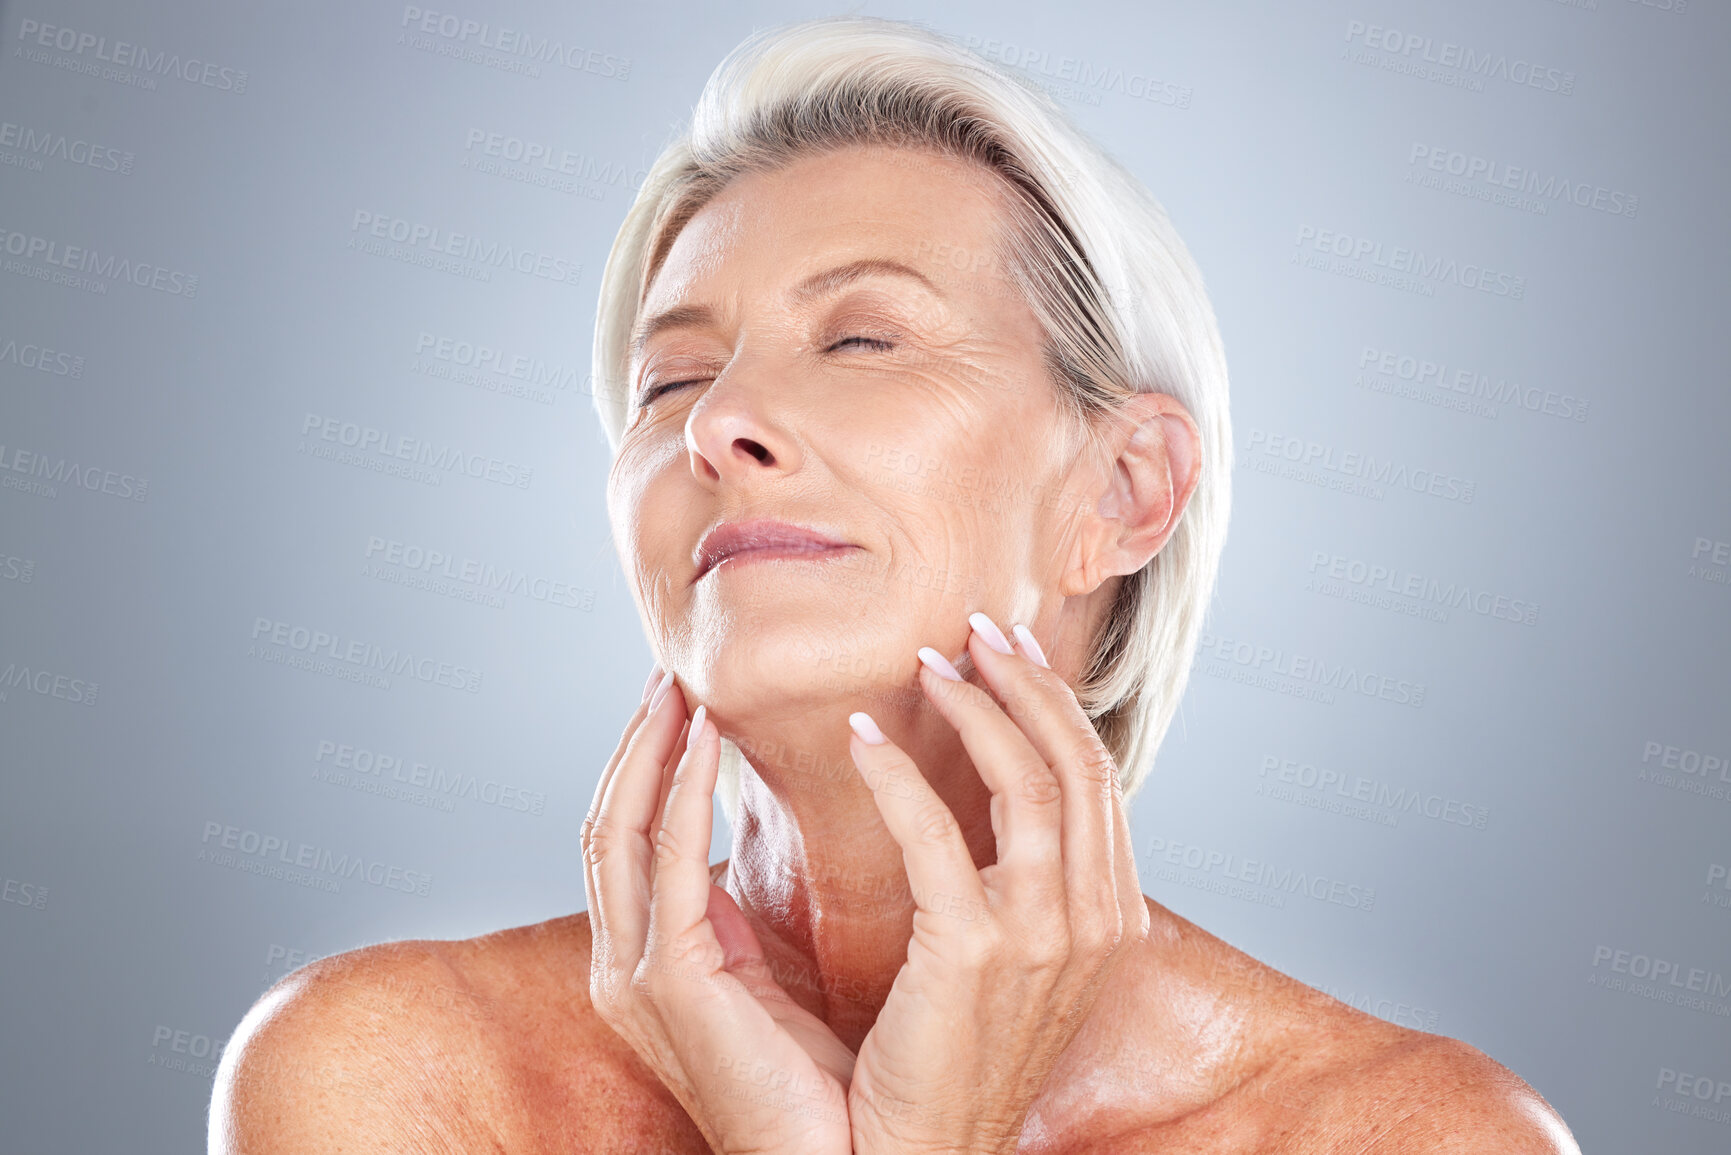 Buy stock photo Senior woman, relax and beauty for skincare, cosmetic or facial treatment against a grey studio background. Happy elderly female hands touching face in satisfaction for perfect skin, glow or makeup